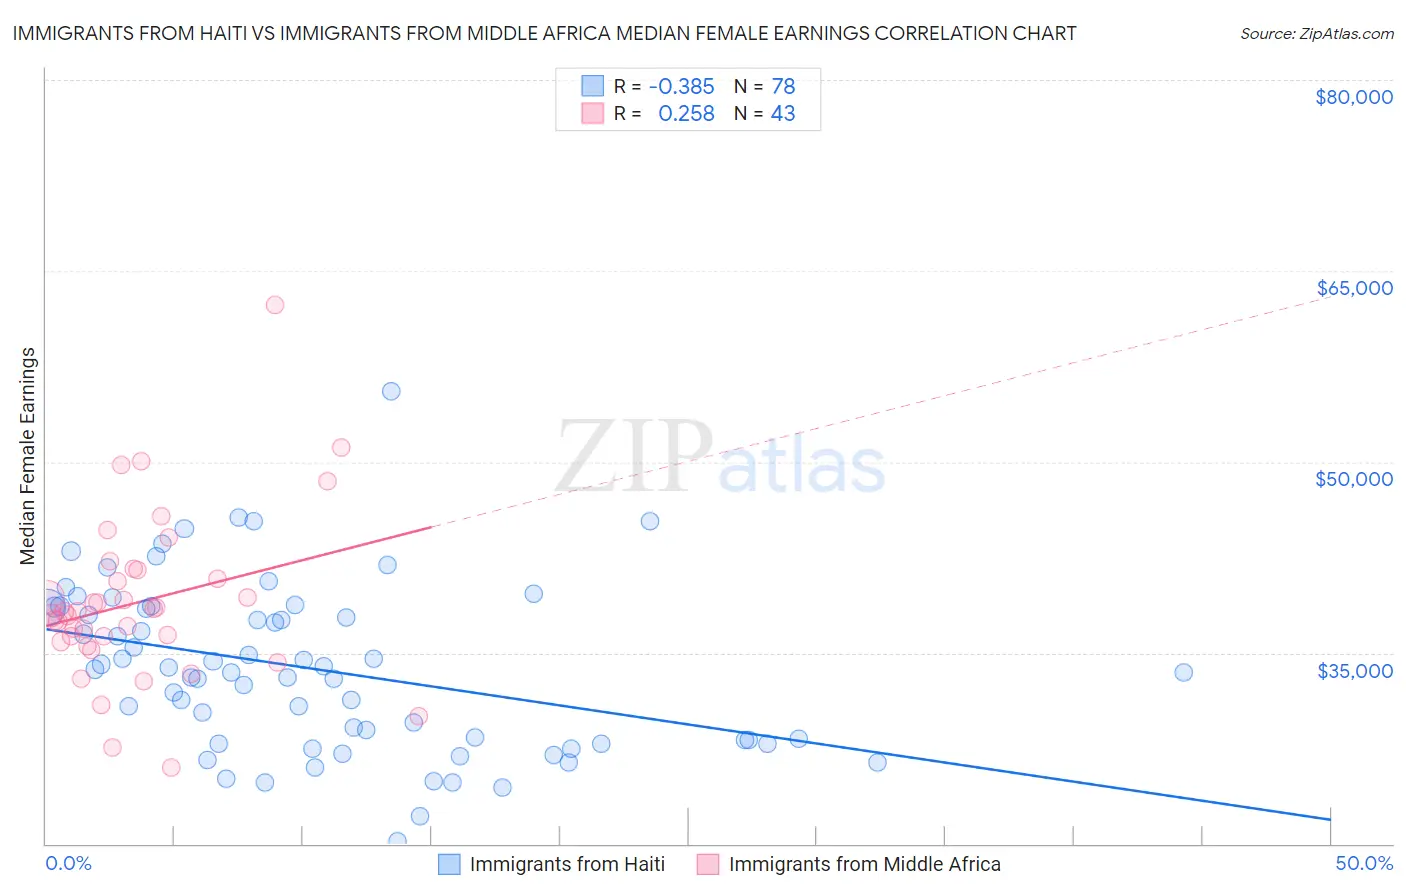 Immigrants from Haiti vs Immigrants from Middle Africa Median Female Earnings